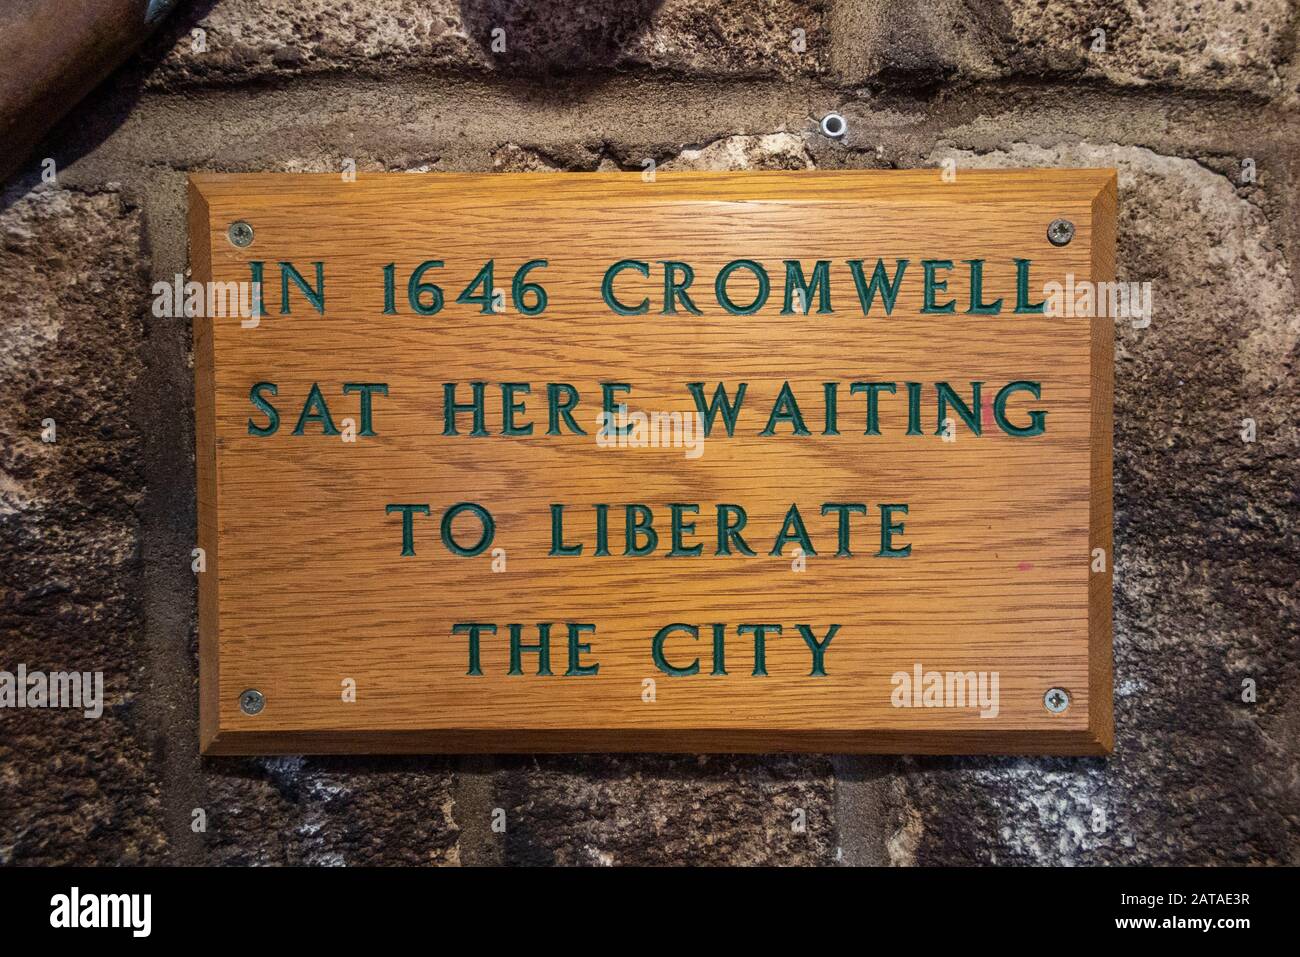 A sign commemorating Oliver Cromwell's liberation of Oxford in 1646 Stock Photo